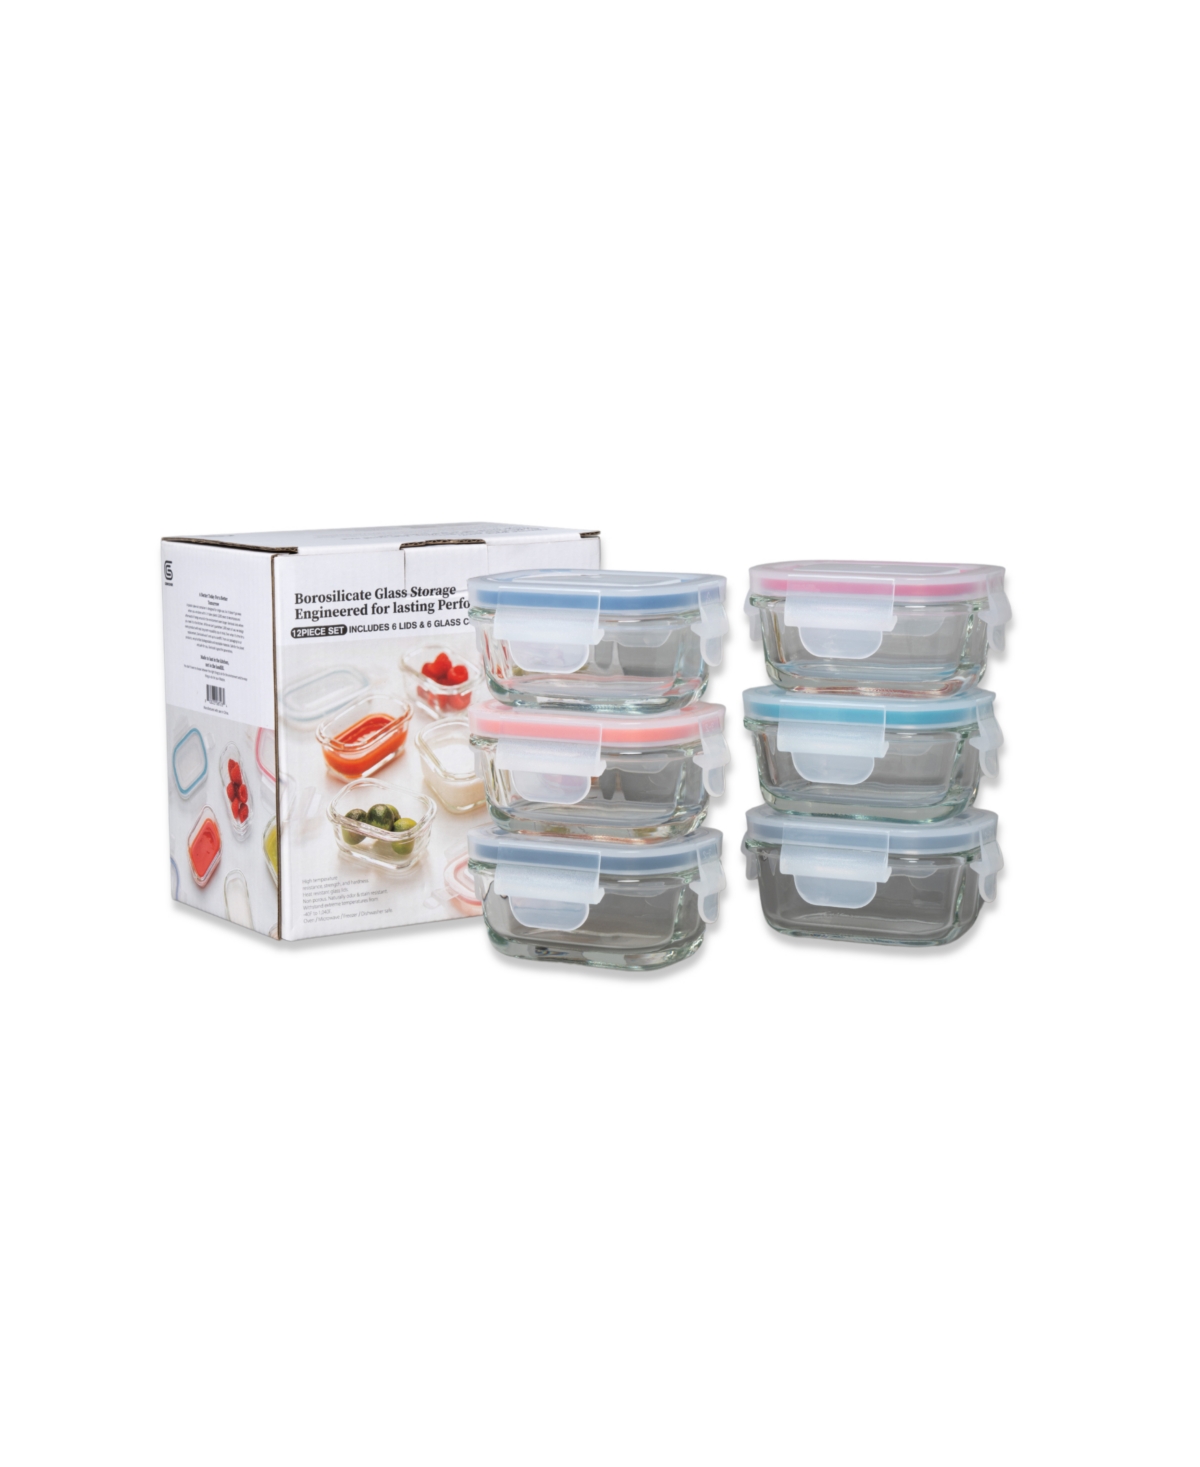 Genicook 12 Pc Rectangular Shape Borosilicate Glass Small Baby-size Meal And Food Storage Containers Set In Multicolor